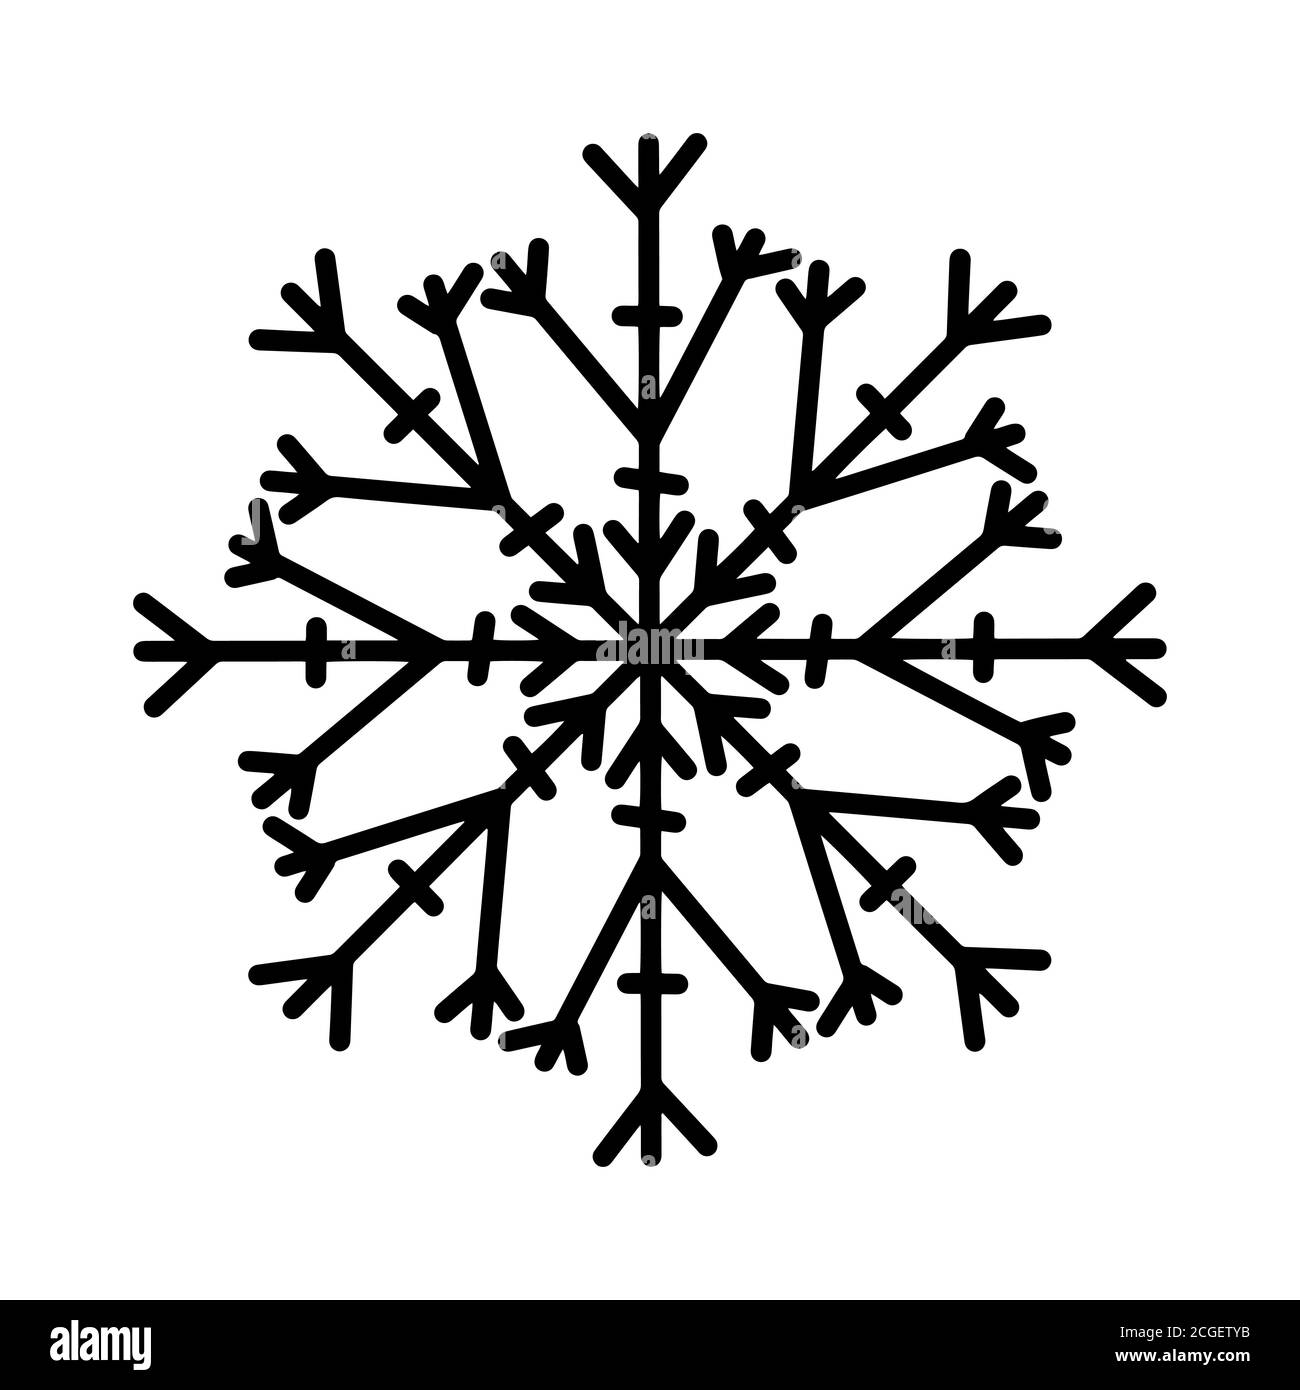 Hand drawn snowflake icon. Isolated on white background. Stock Vector